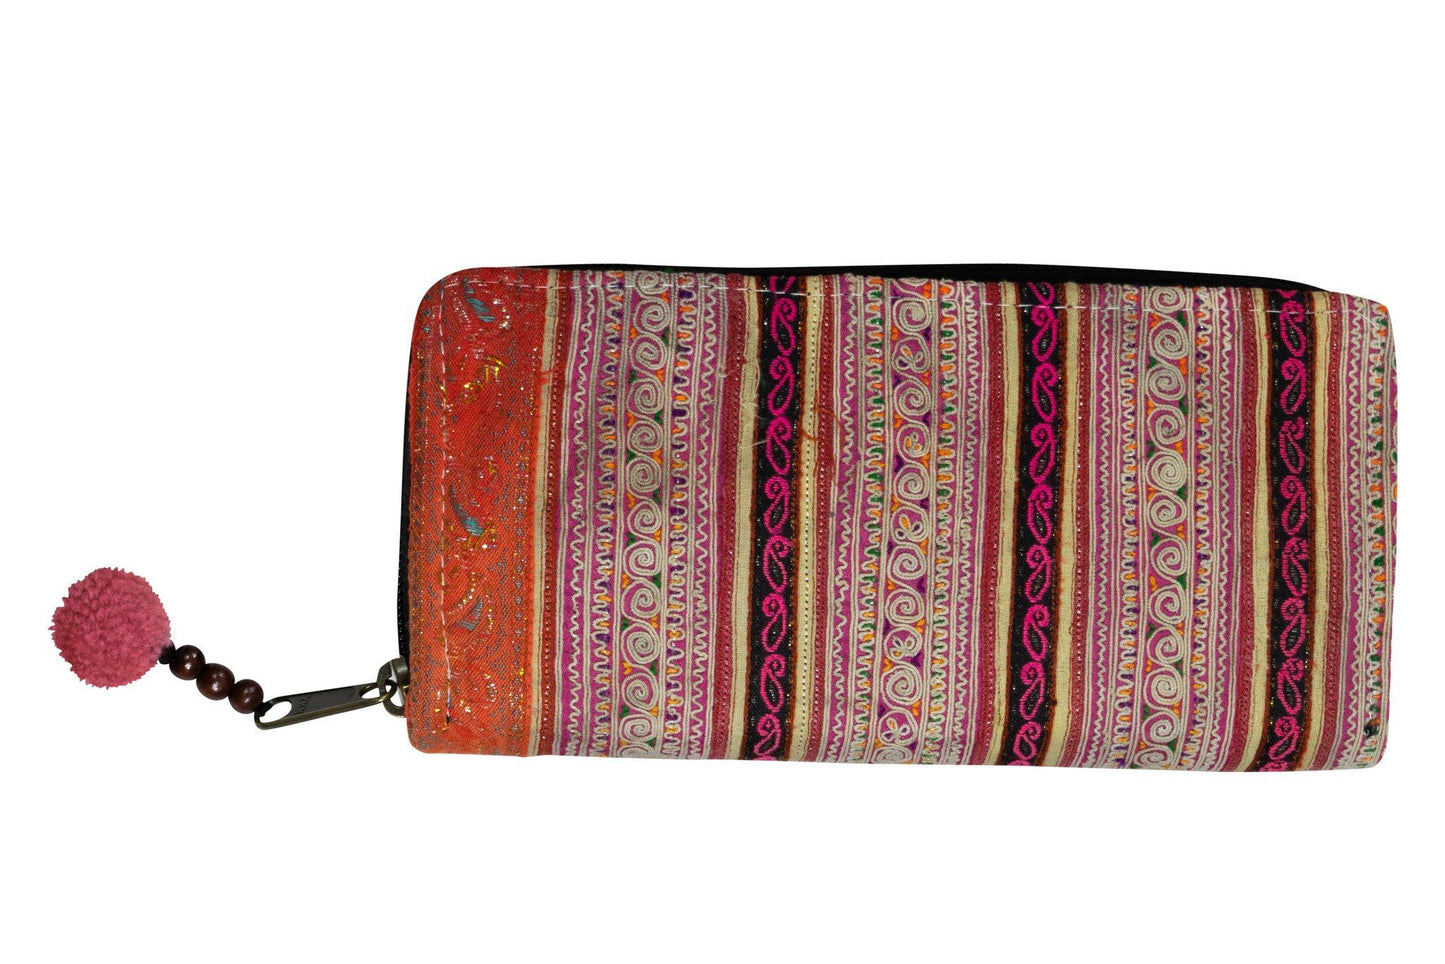 Handmade Hill Tribe Tribal Long Wallet Bag Purse - CCCollections